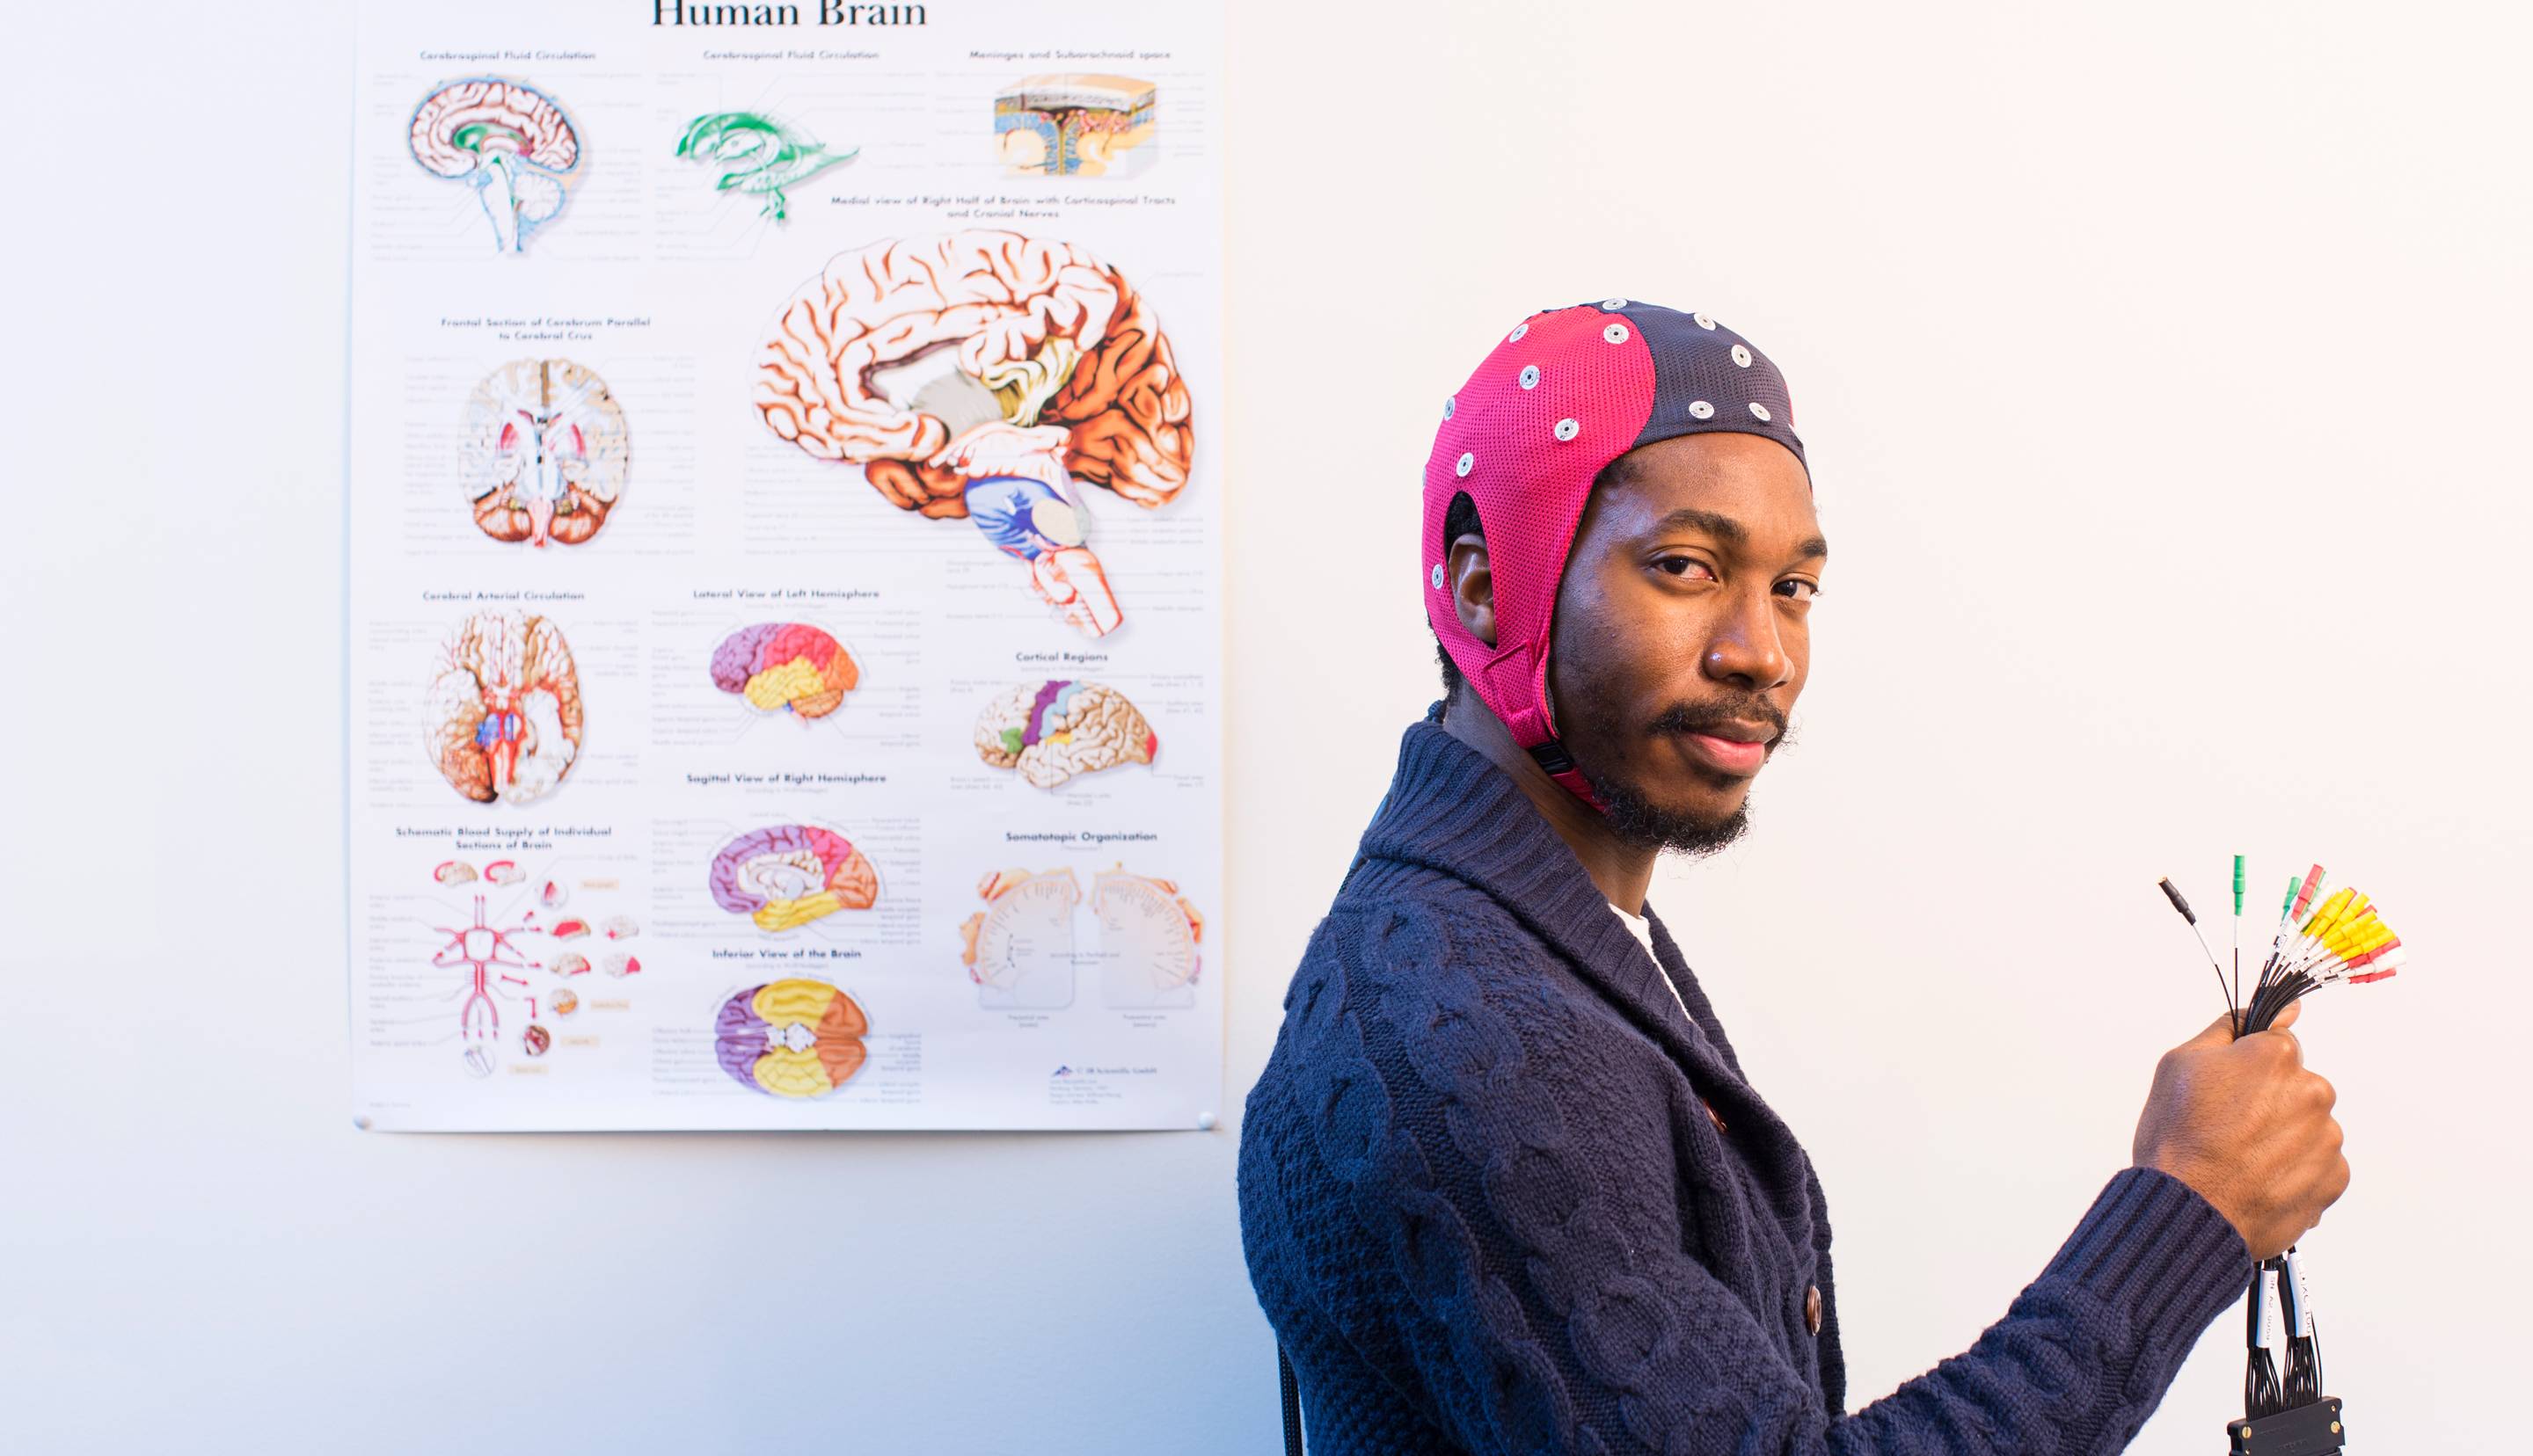 Young Black man in headgear next to a map of the human brain